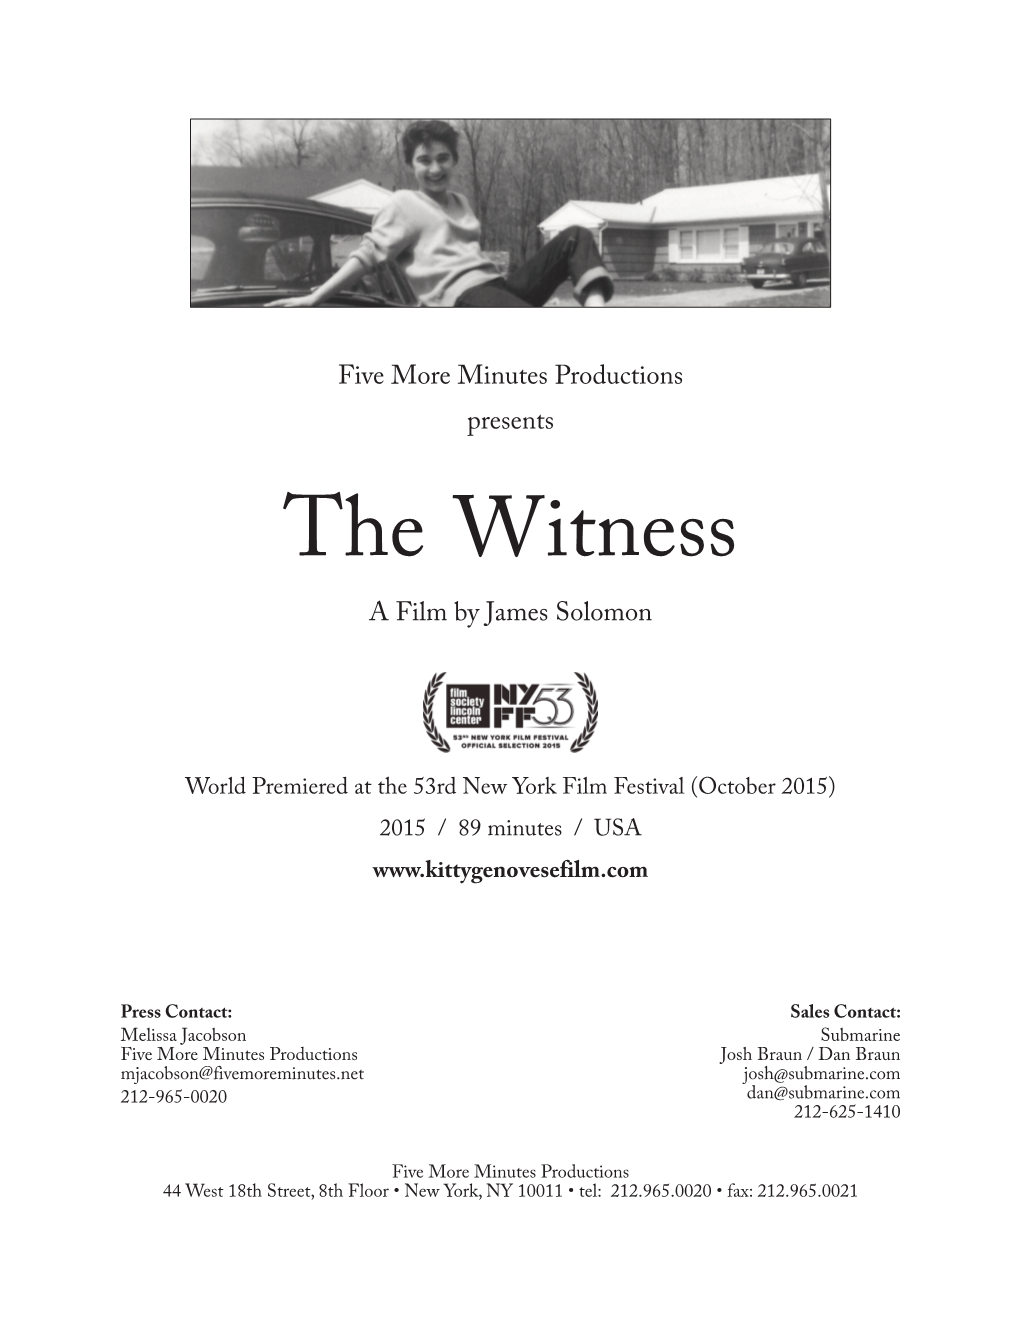 The Witness a Film by James Solomon